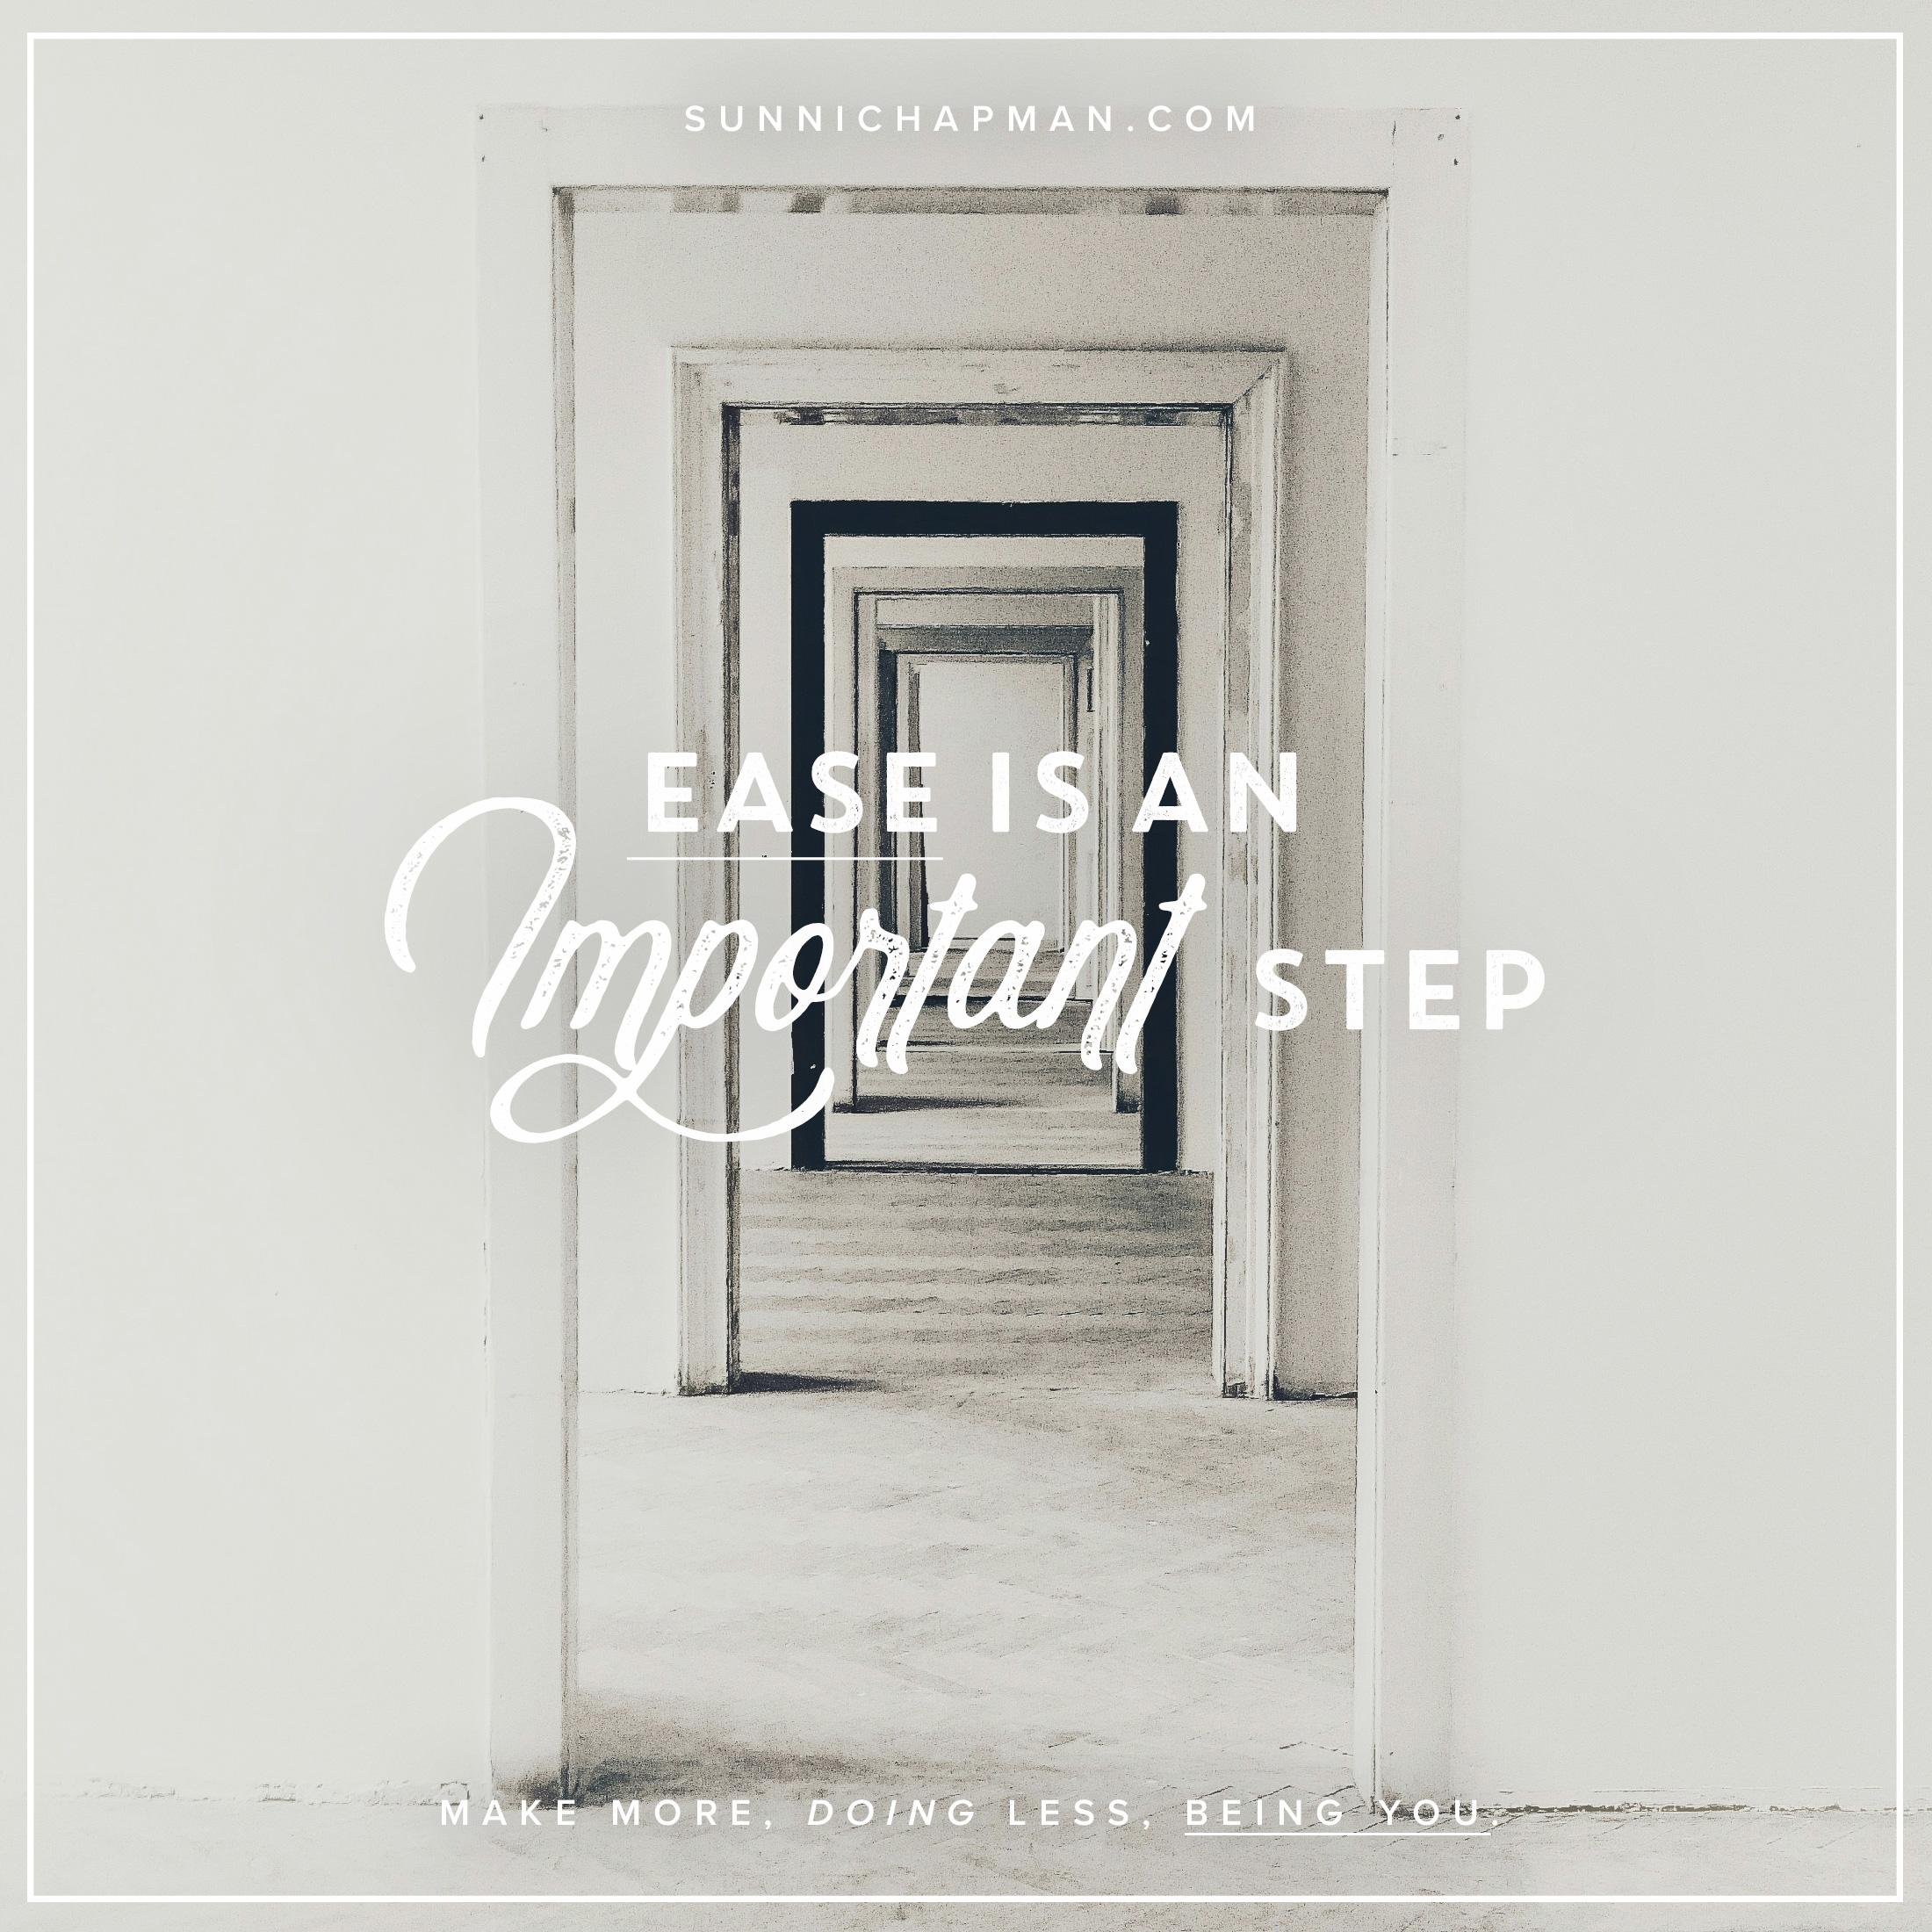 
The image features a perspective view of a sequence of door frames decreasing in size, creating a tunnel-like effect. Overlaid on the image, in an elegant cursive and print mix font, the text reads:

"SUNNICHAPMAN.COM
EASE IS AN Important step
MAKE MORE, DOING LESS, BEING YOU.